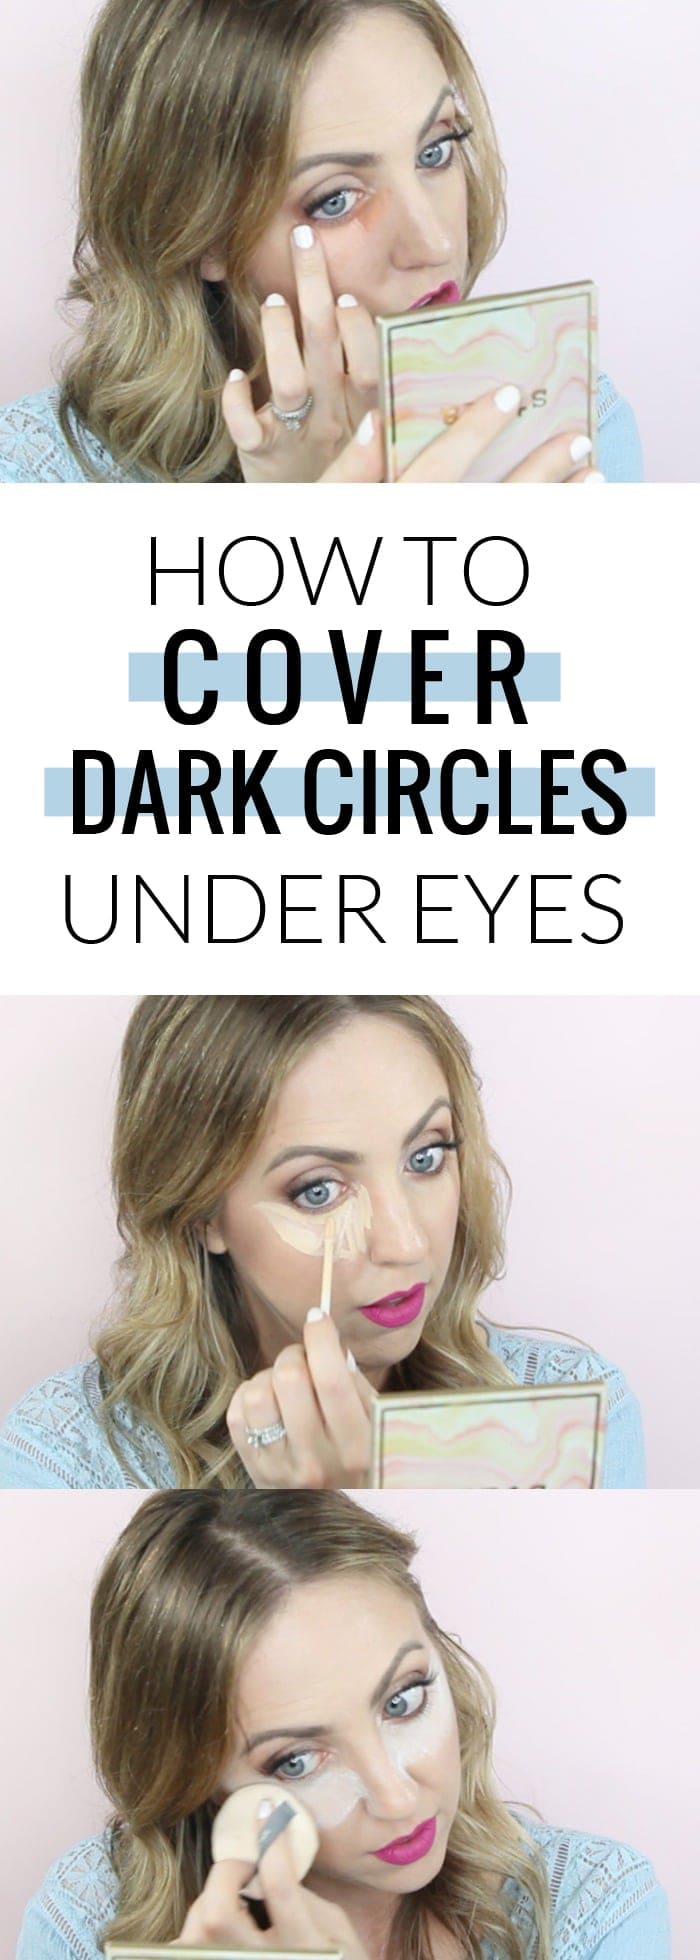 Concealing, color correcting, baking, oh my! Popular Houston Beauty Blogger Meg O on the Go shares all of the tricks to get a perfect and bright under eye area. Cover those dark circles under eyes with makeup!